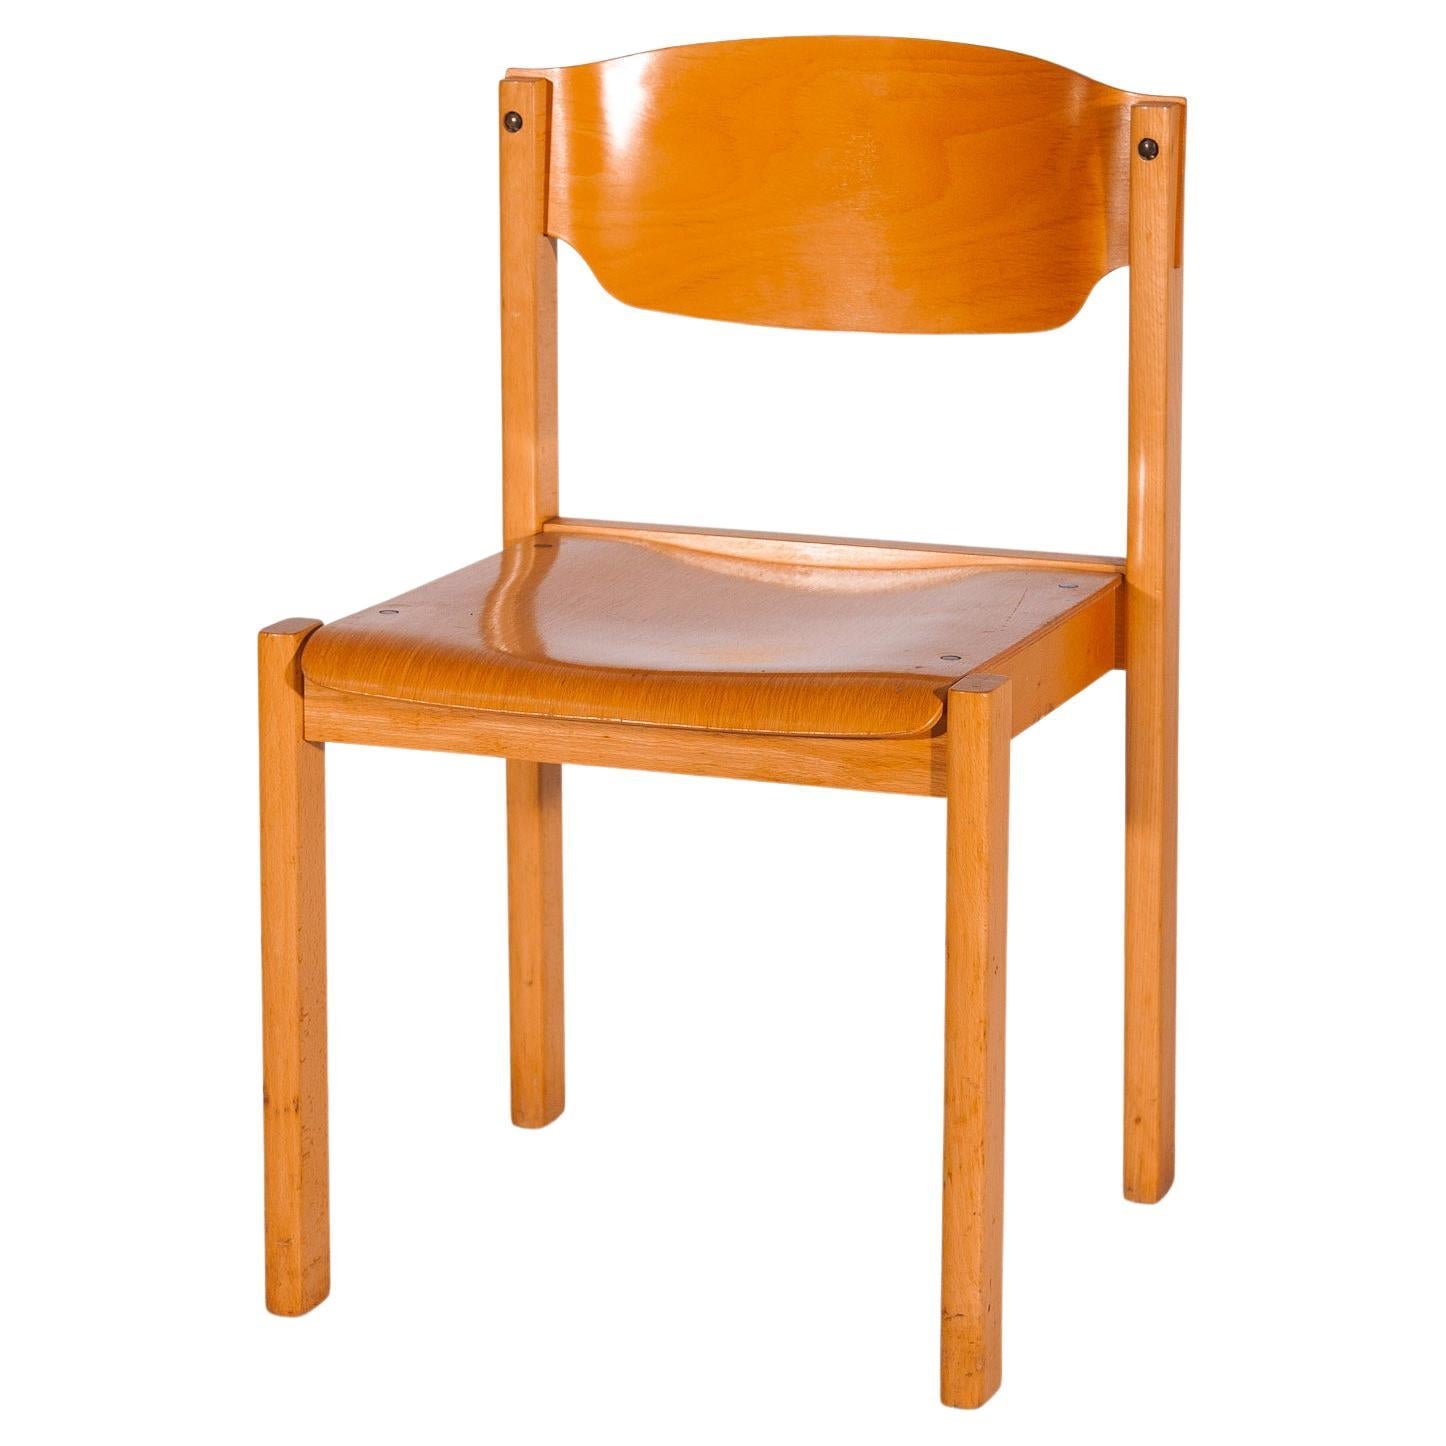 Set of six stacking chairs in the style of Roland Rainer, beech, 1970s, Germany.
Mid-Century Modern six dining chairs handcrafted in beech and plywood a classic and popular icon design furniture with a comfortable seat.

The condition is good